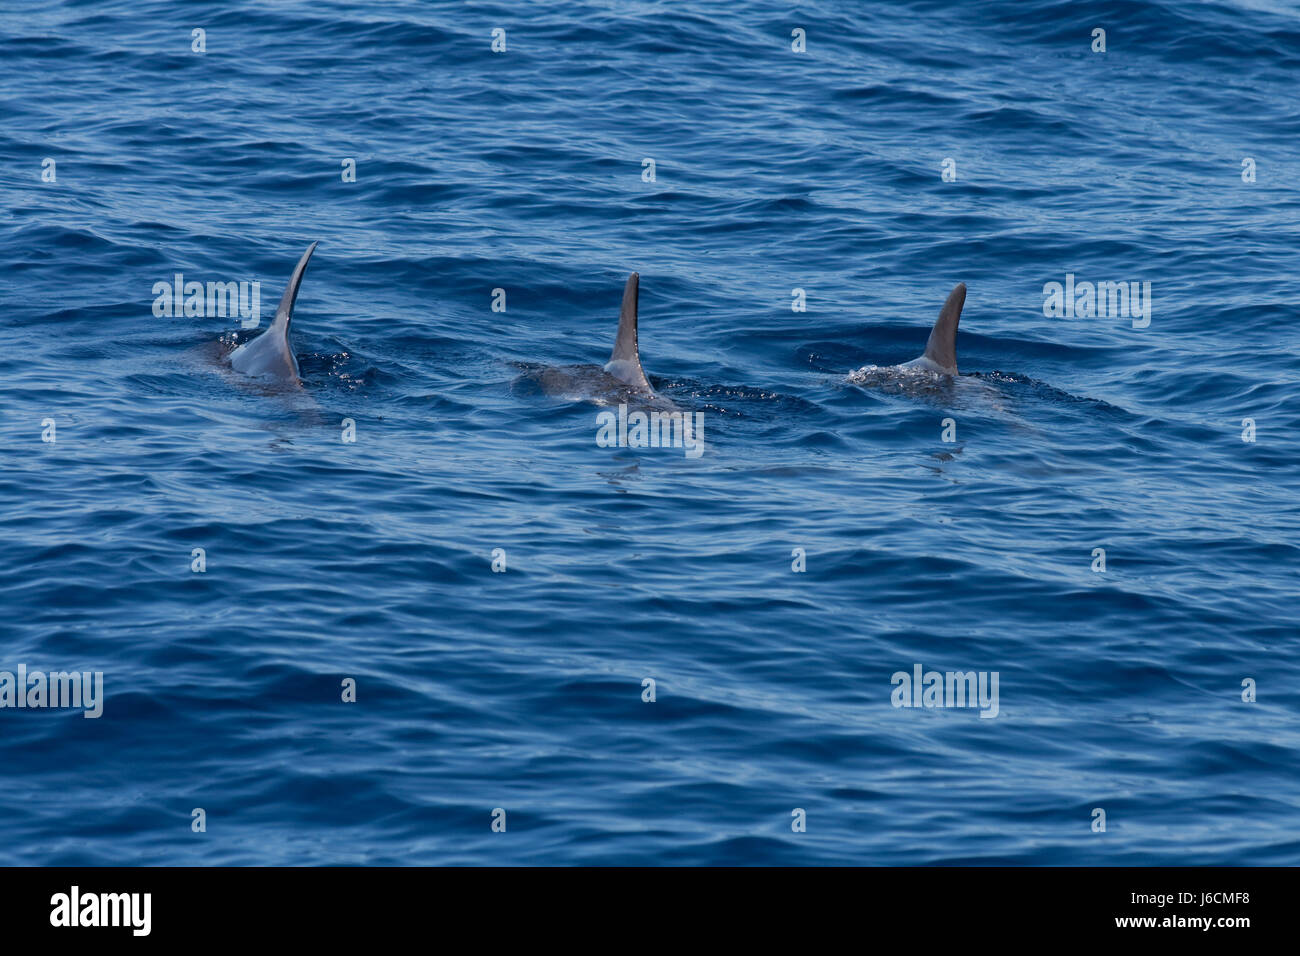 animal mammal formation salt water sea ocean water dolphin dolphins blue Stock Photo